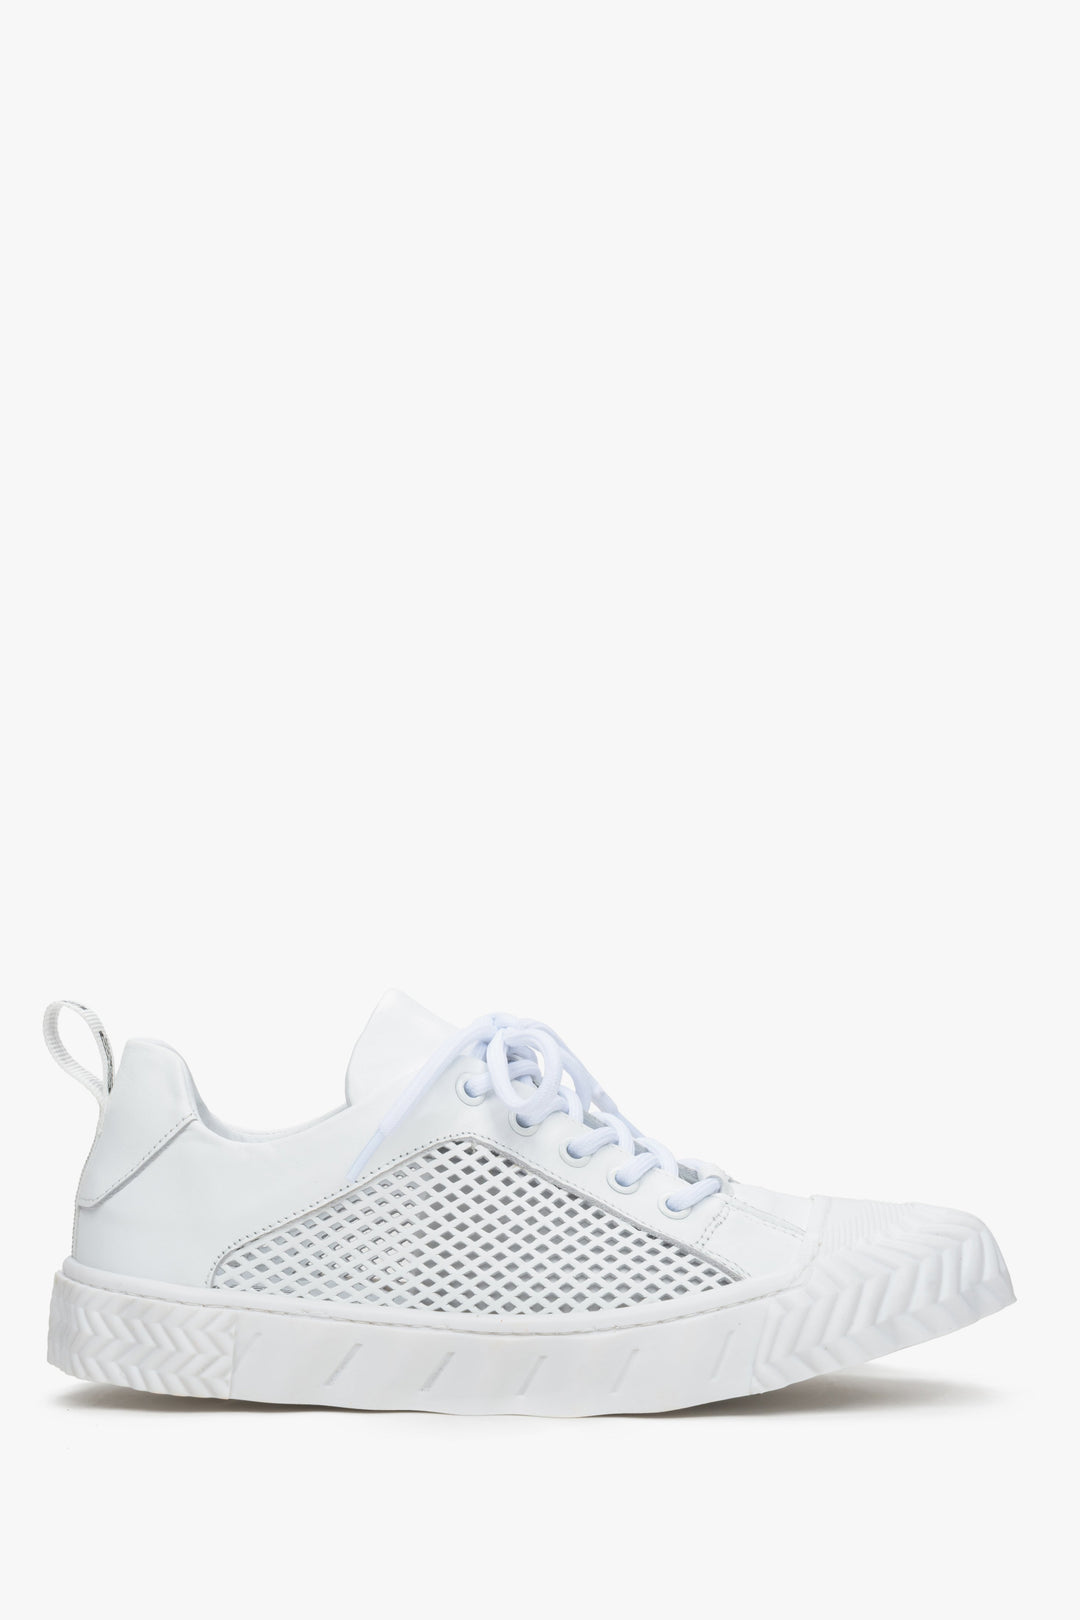 Womens White Perforated Sneakers for Summer ES 8 ER00113249